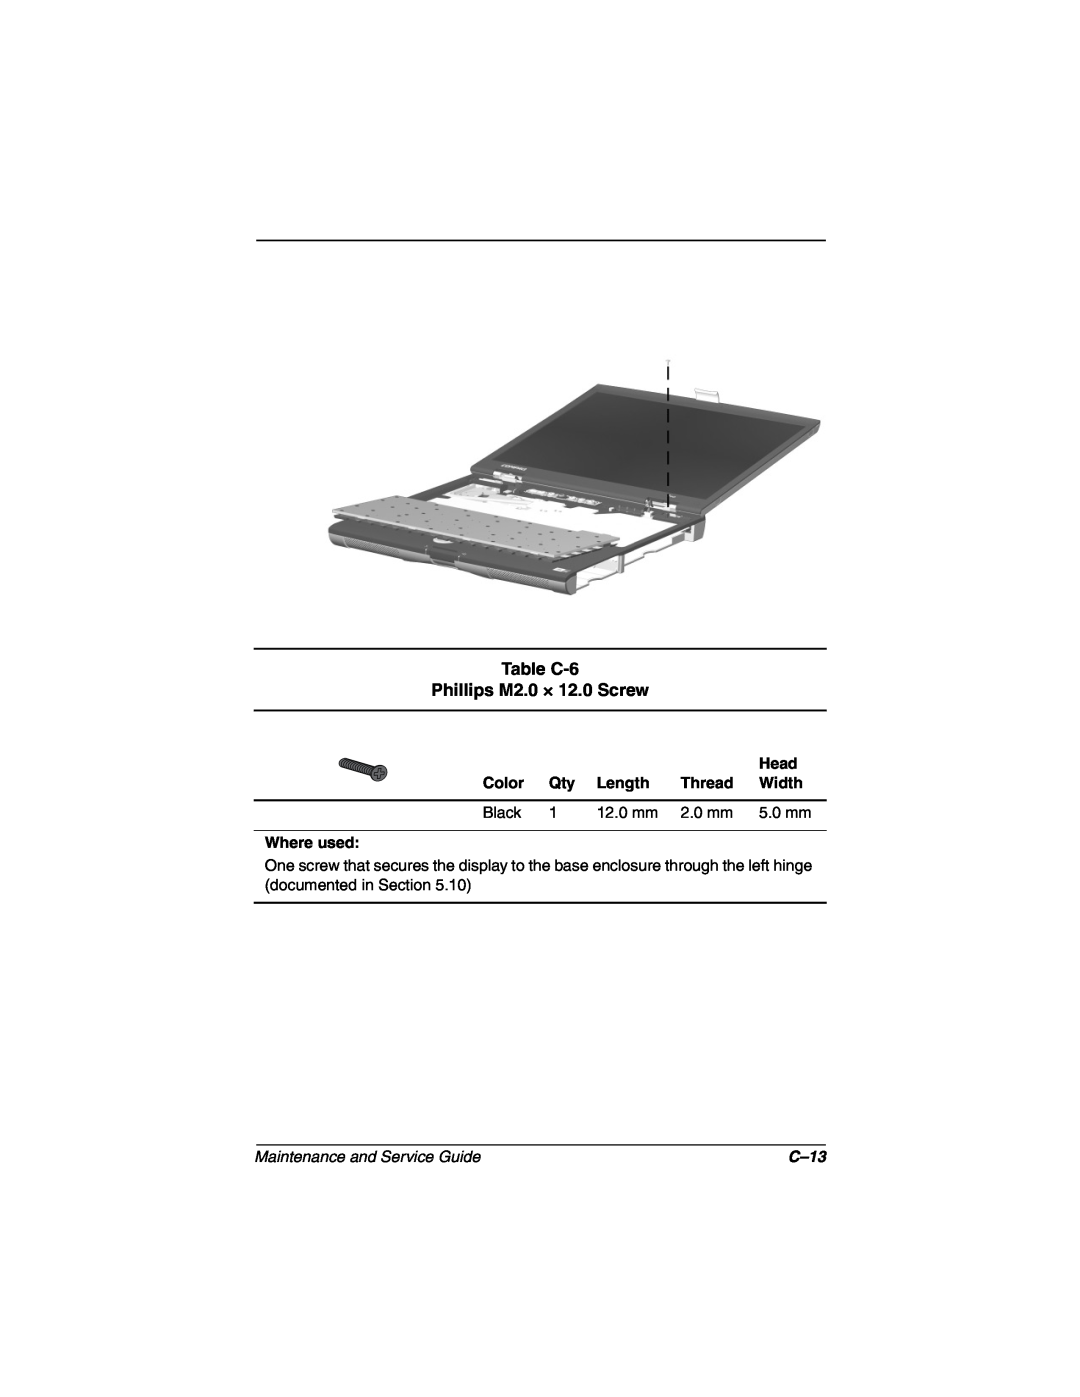 Compaq N160 manual Table C-6 Phillips M2.0 × 12.0 Screw, Maintenance and Service Guide, C-13 